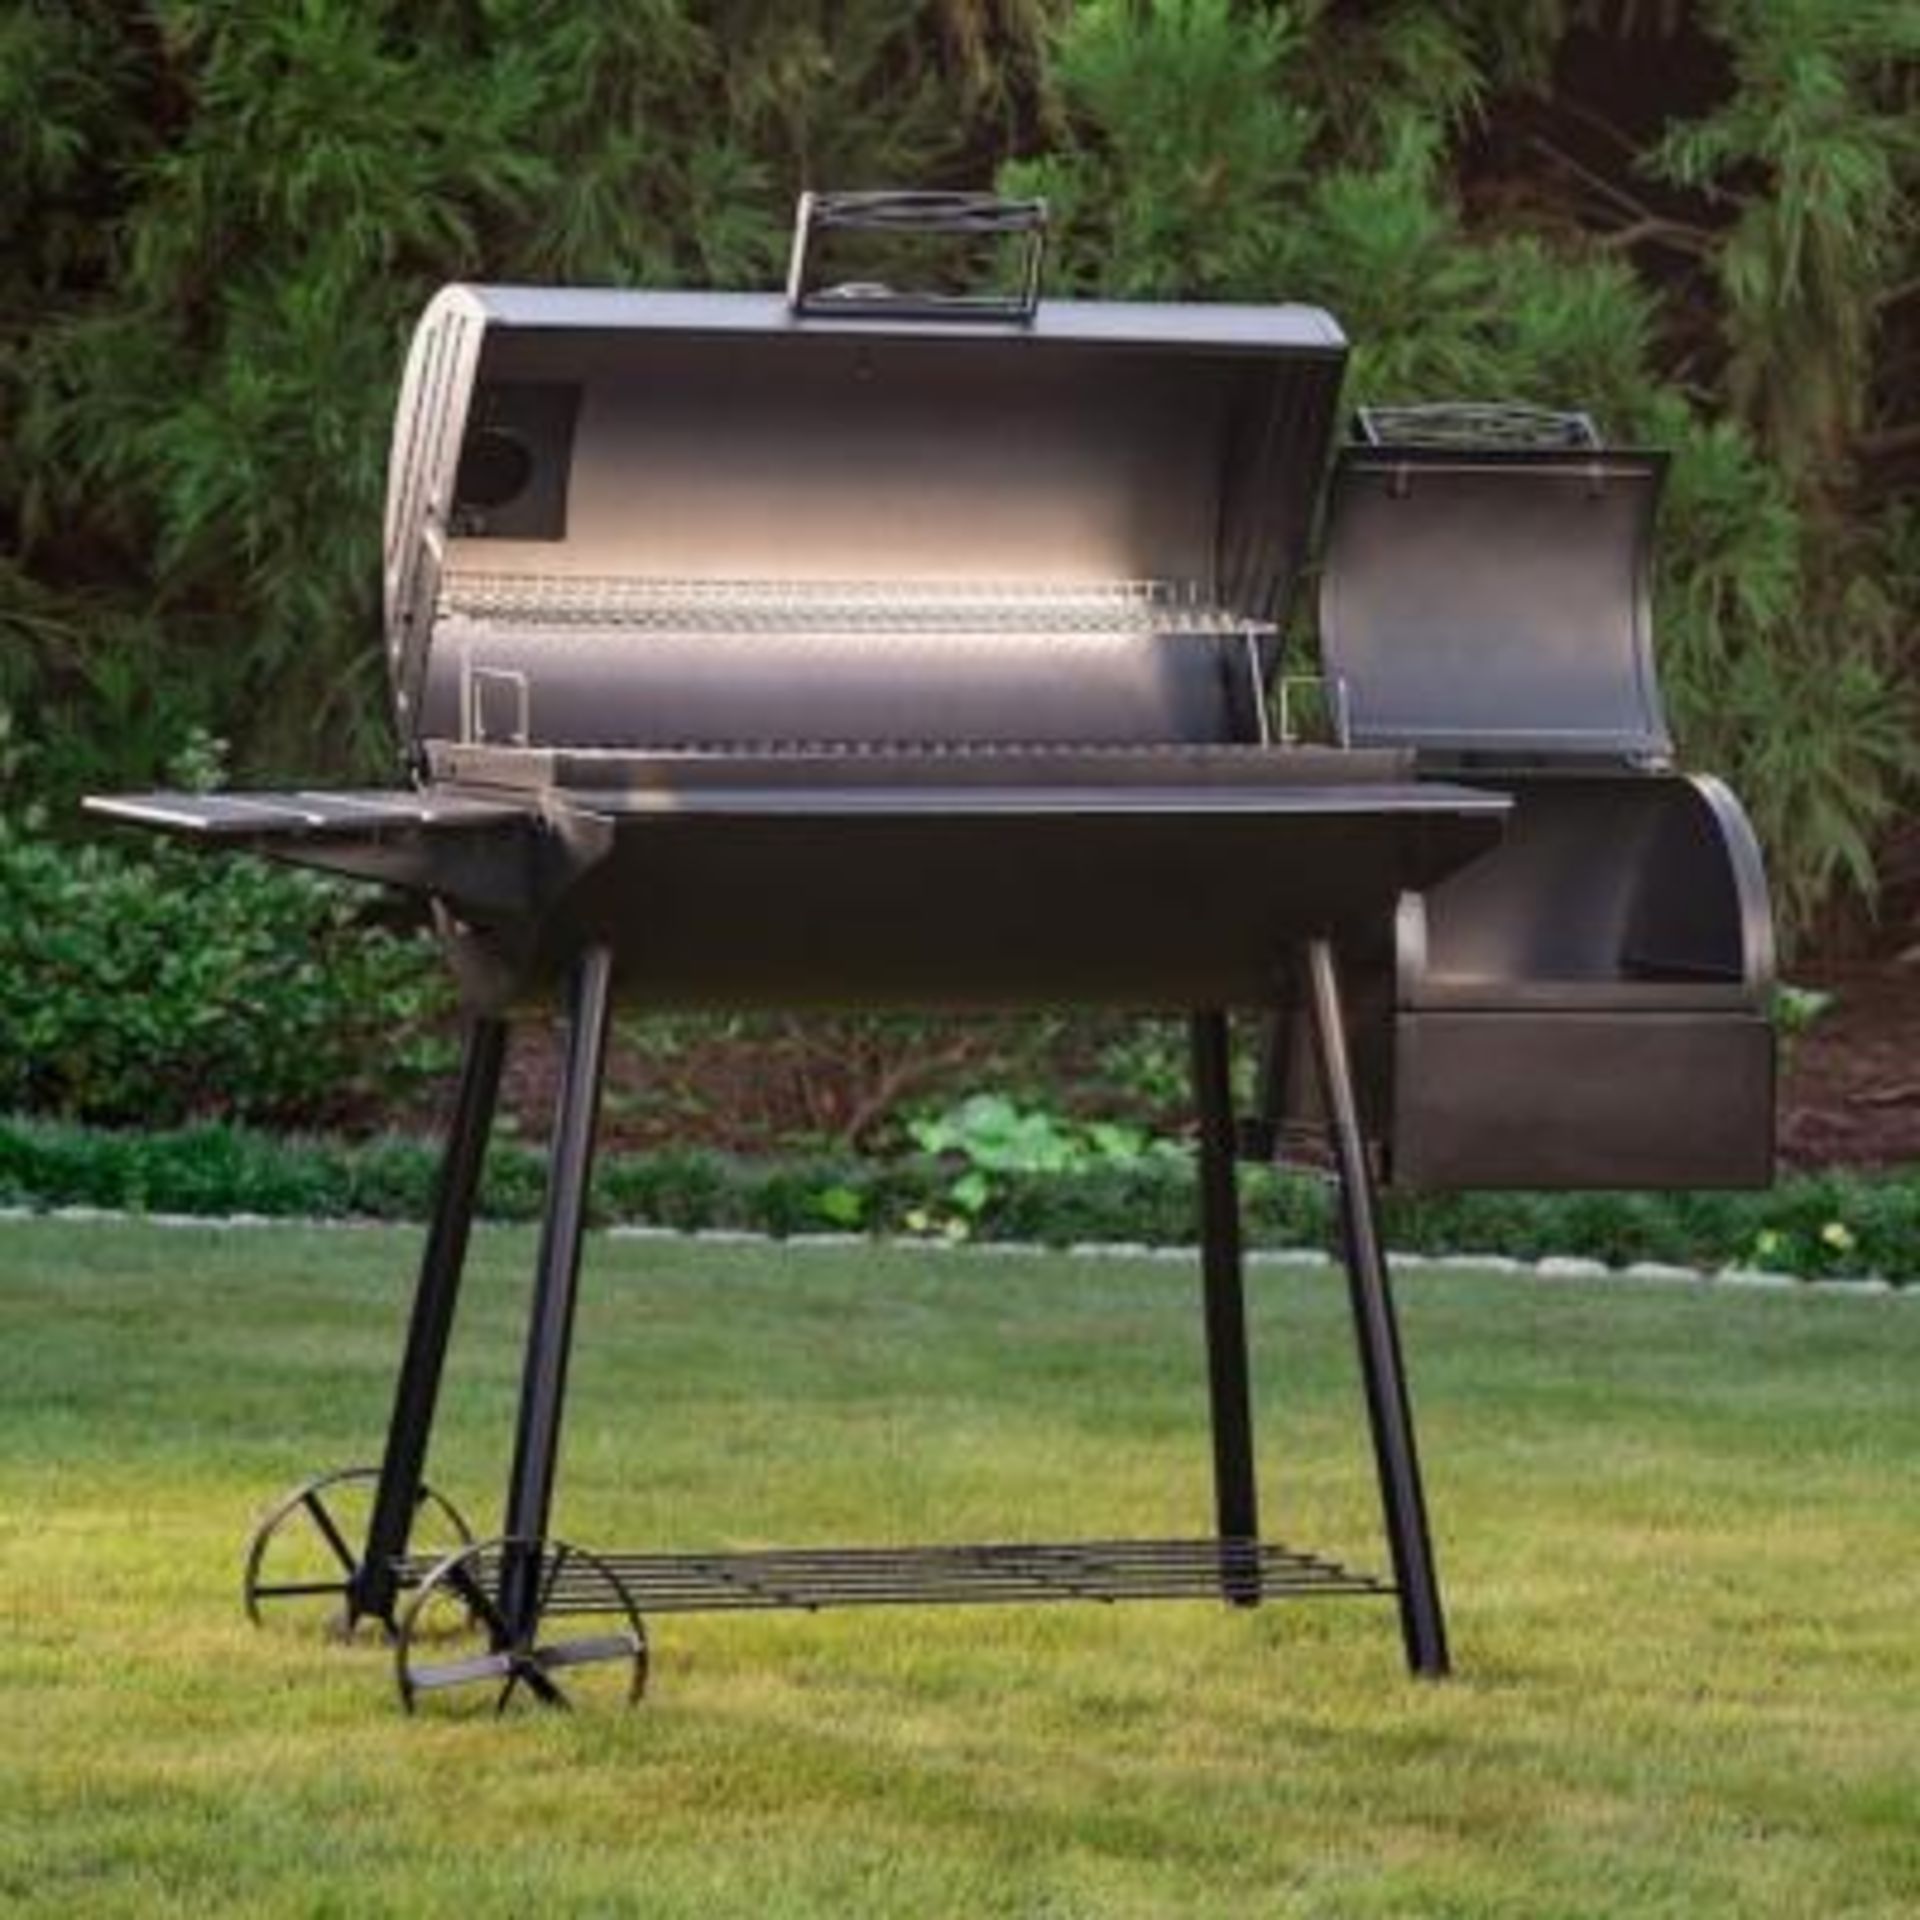 BRAND NEW KING-GRILLER 29 INCH OFF SET SMOKER BY CHAR GRILLER - Image 2 of 3